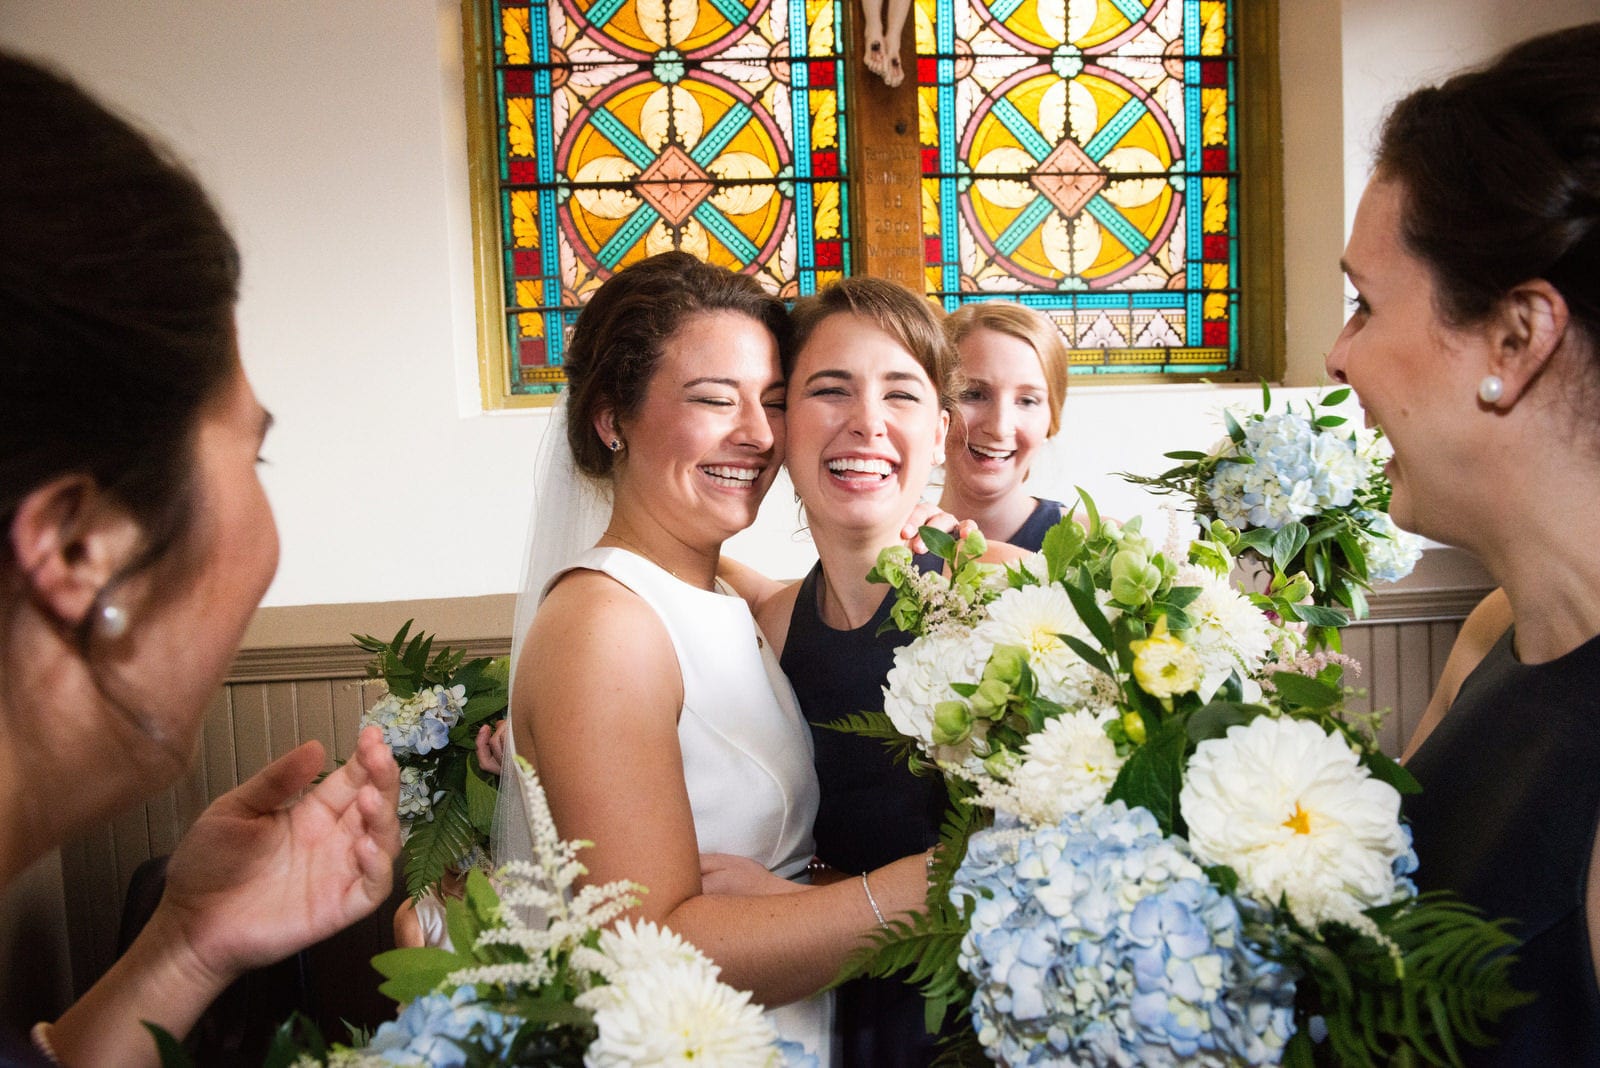 A smiling bride is hugged by her smiling bridesmaids after her wedding at St. Stanislaus church in the Strip District.